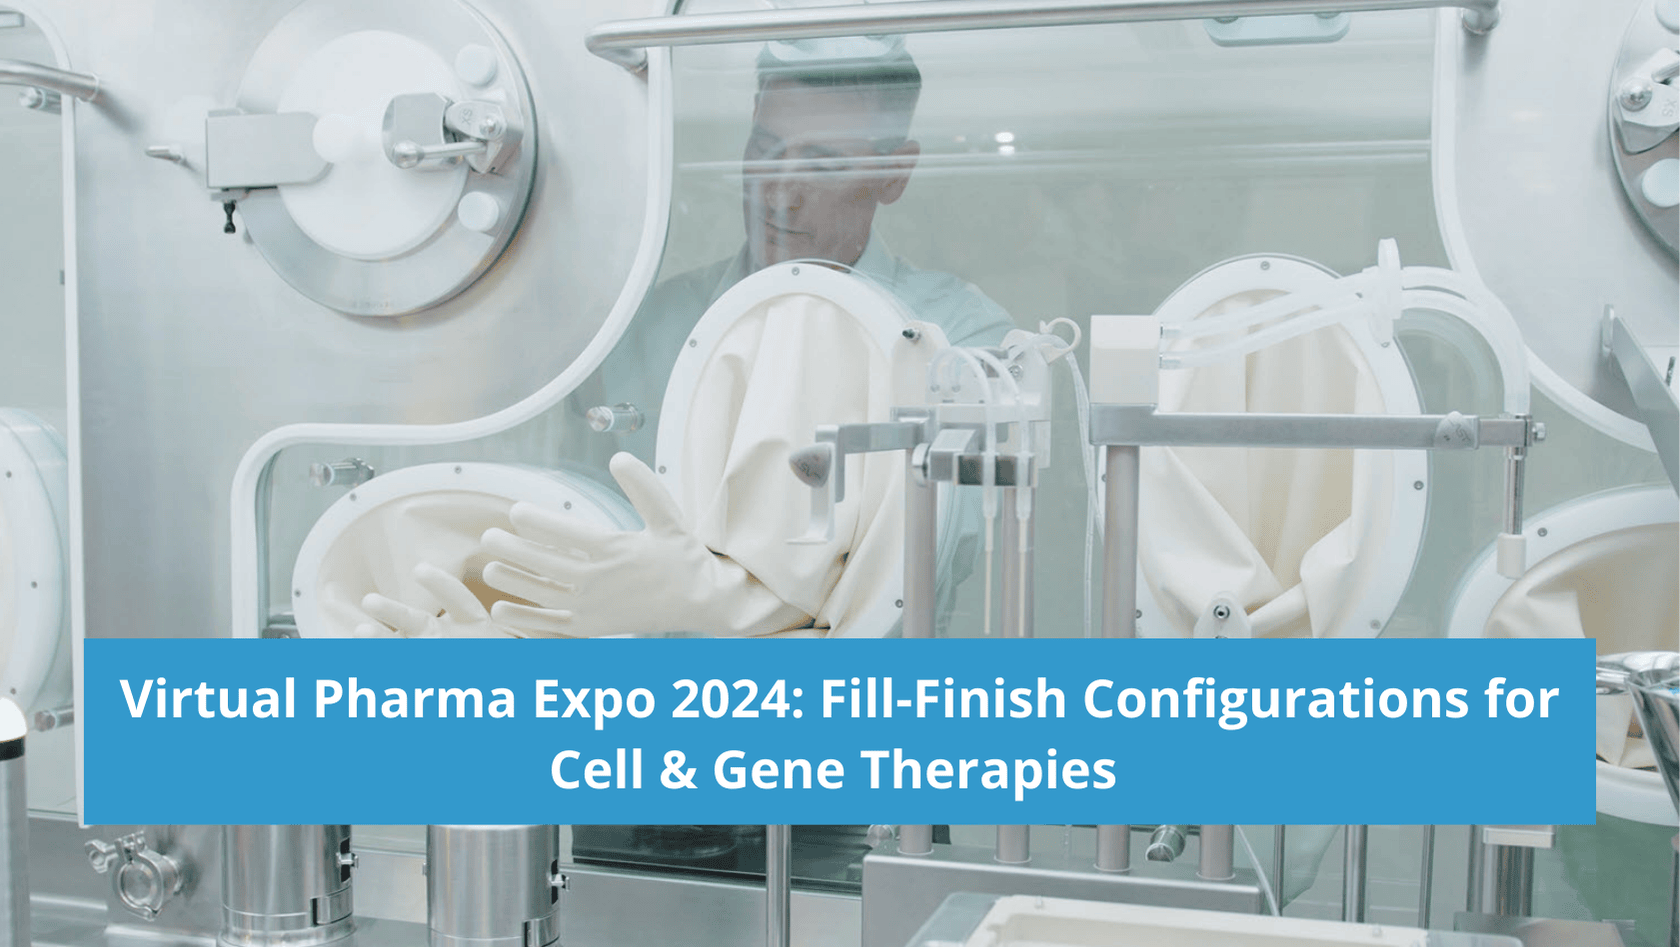 Virtual Pharma Expo 2024: Fill-Finish Configurations for Cell & Gene Therapies